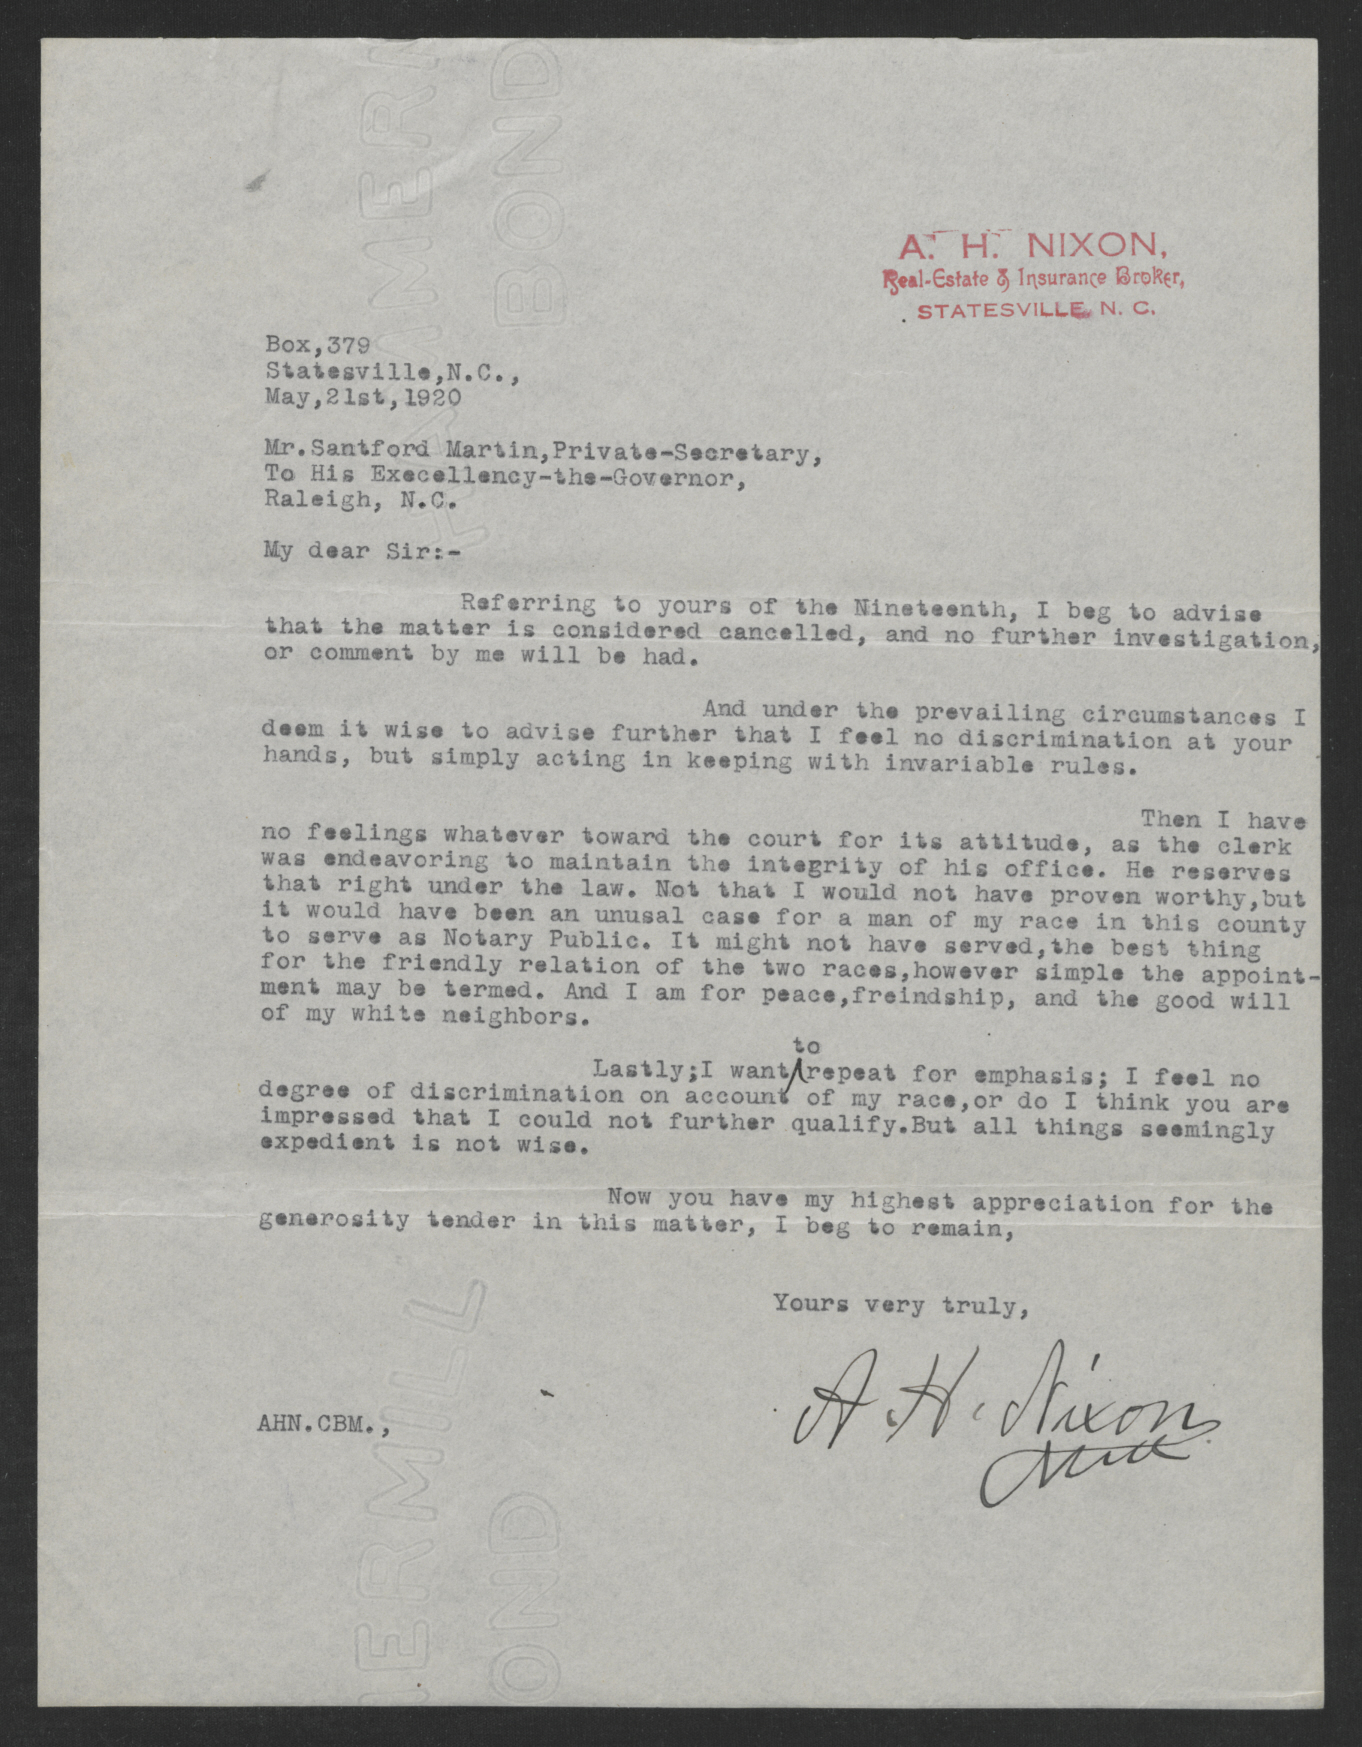 Letter from A. H. Nixon to Santford Martin, May 21, 1920